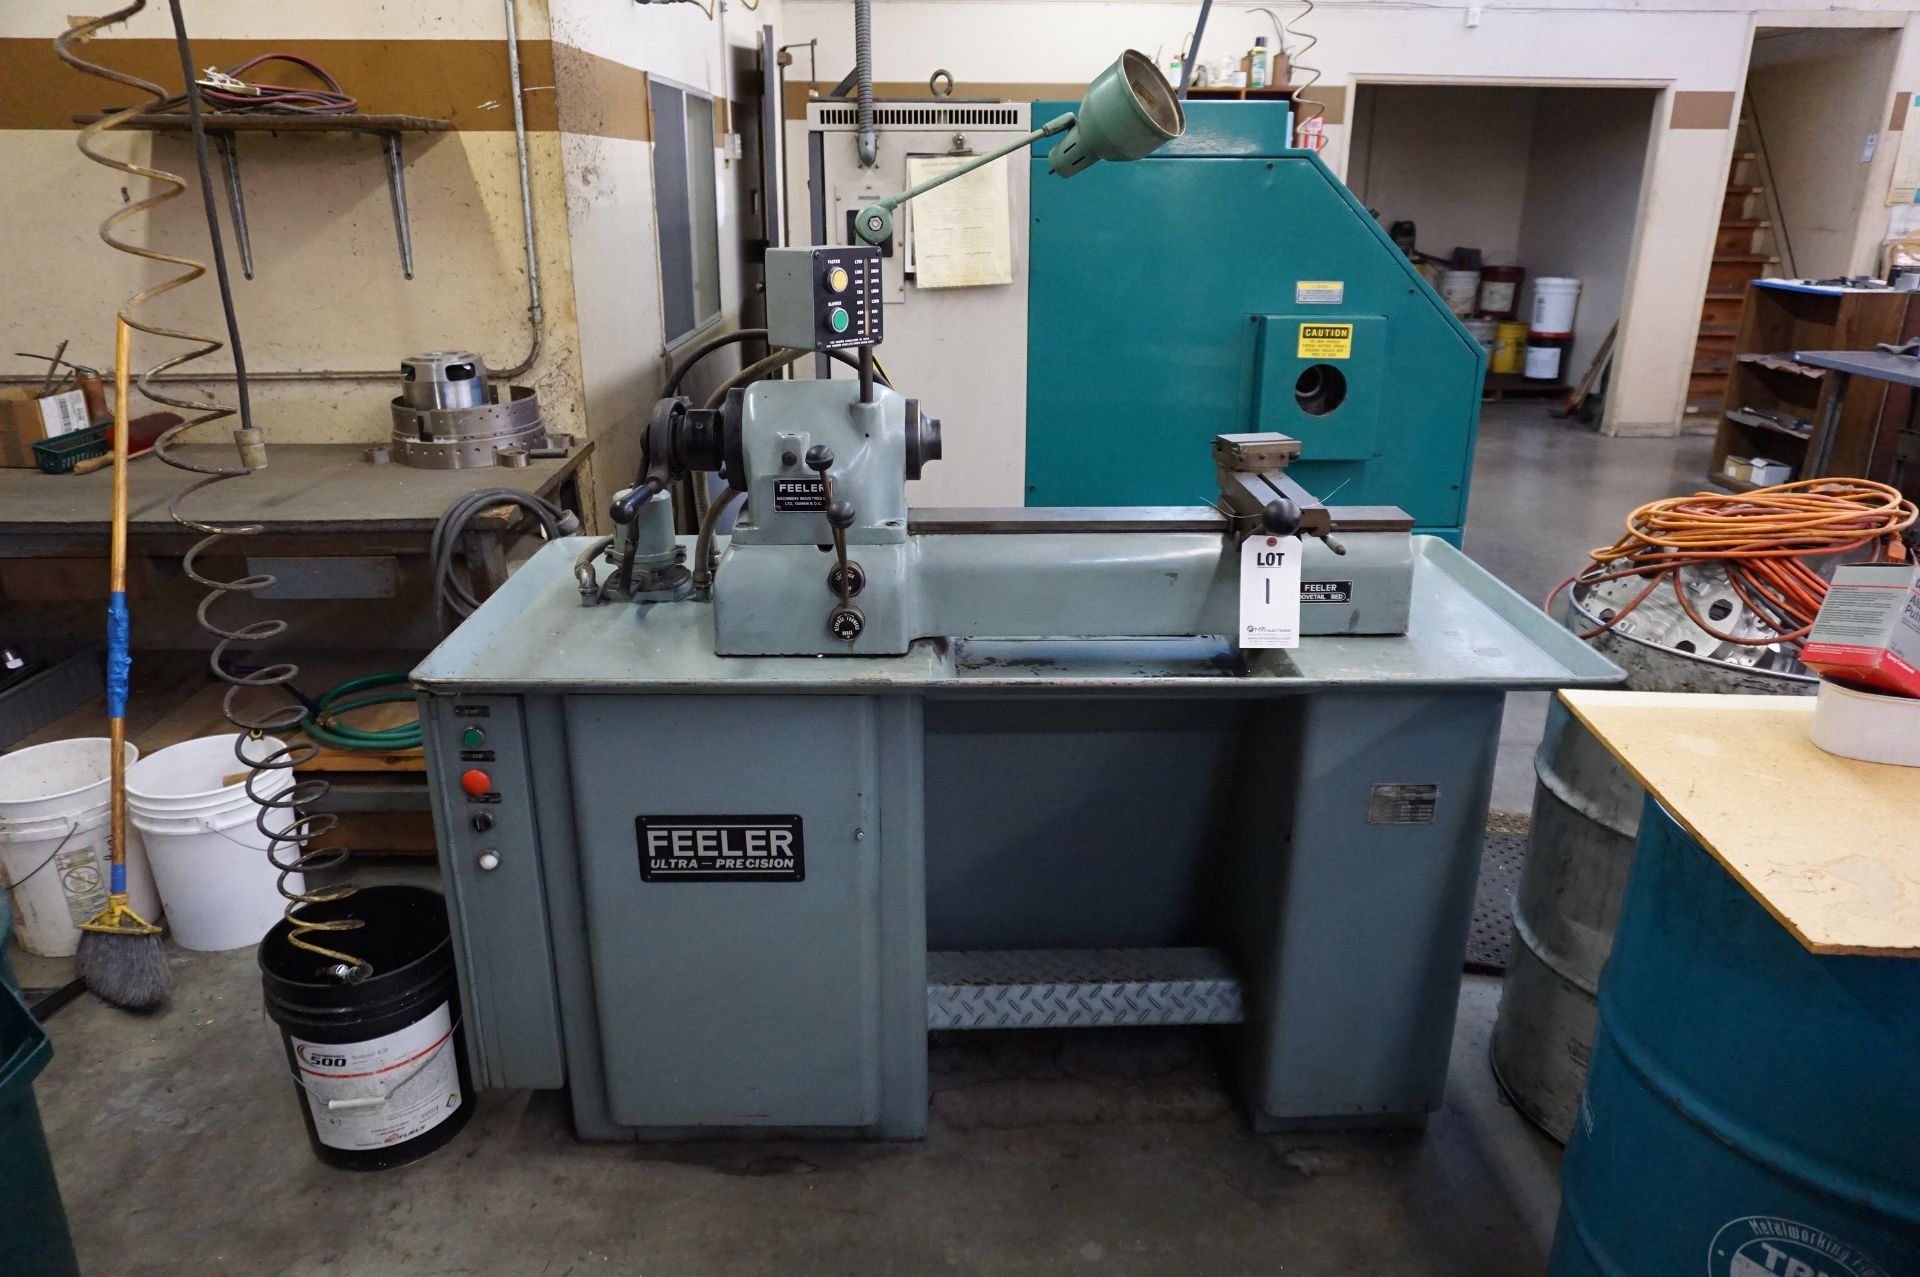 1980 FEELER FSM-59 PRECISION LATHE, S/N 690937, SWING OVER BED 9”, BED LENGTH 36” - Image 5 of 6